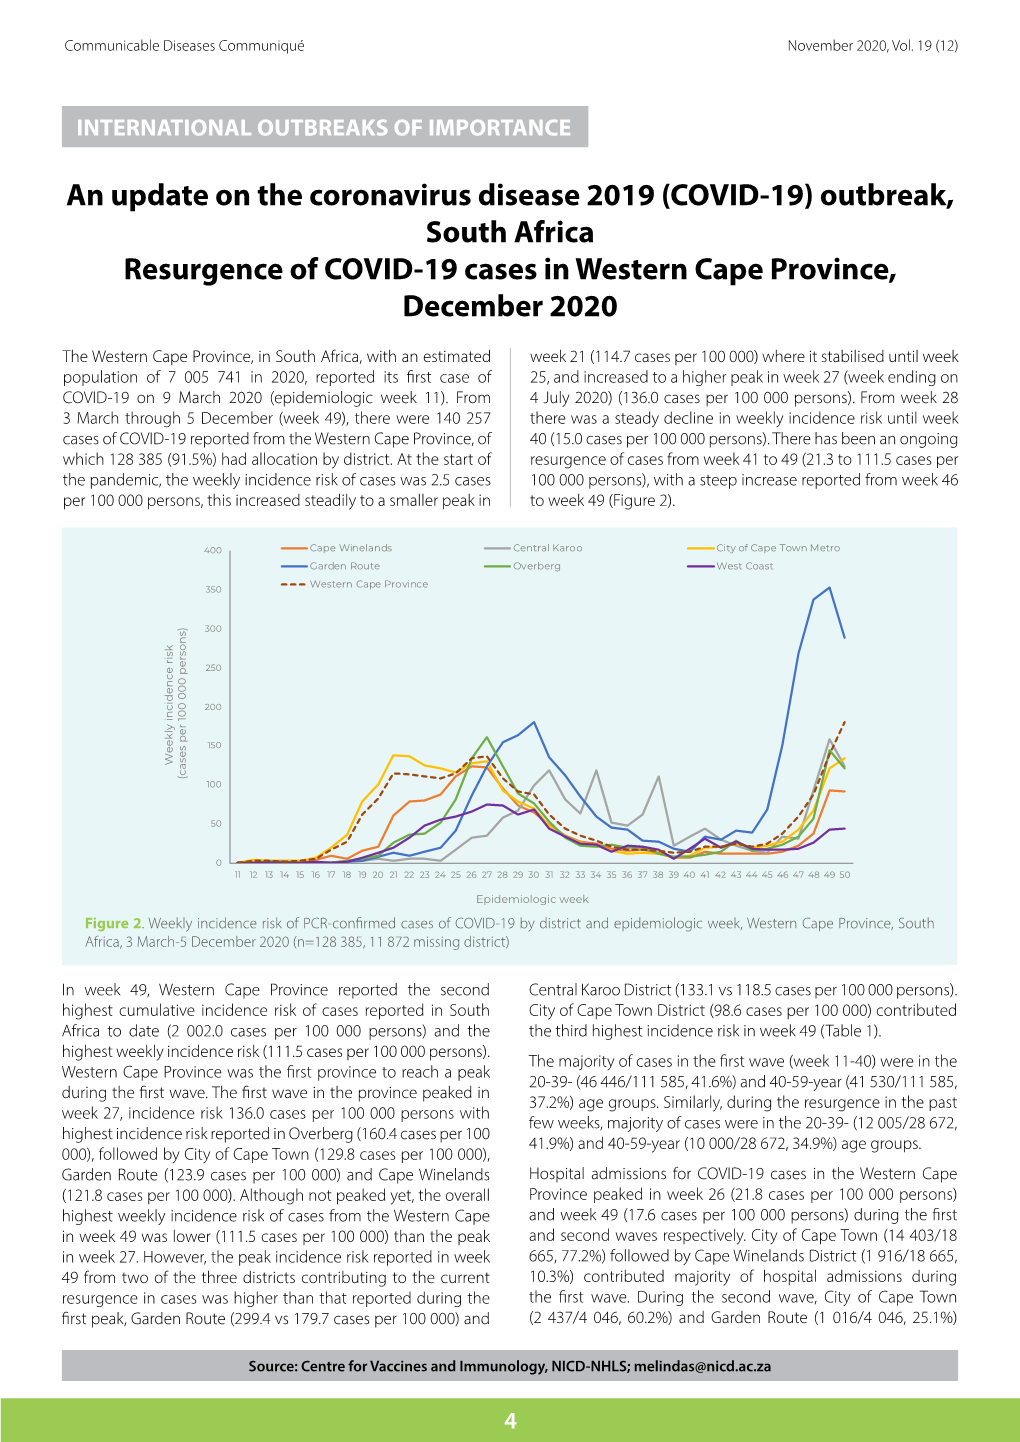 An Update on the Coronavirus Disease 2019 (COVID-19) Outbreak, South Africa Resurgence of COVID-19 Cases in Western Cape Province, December 2020